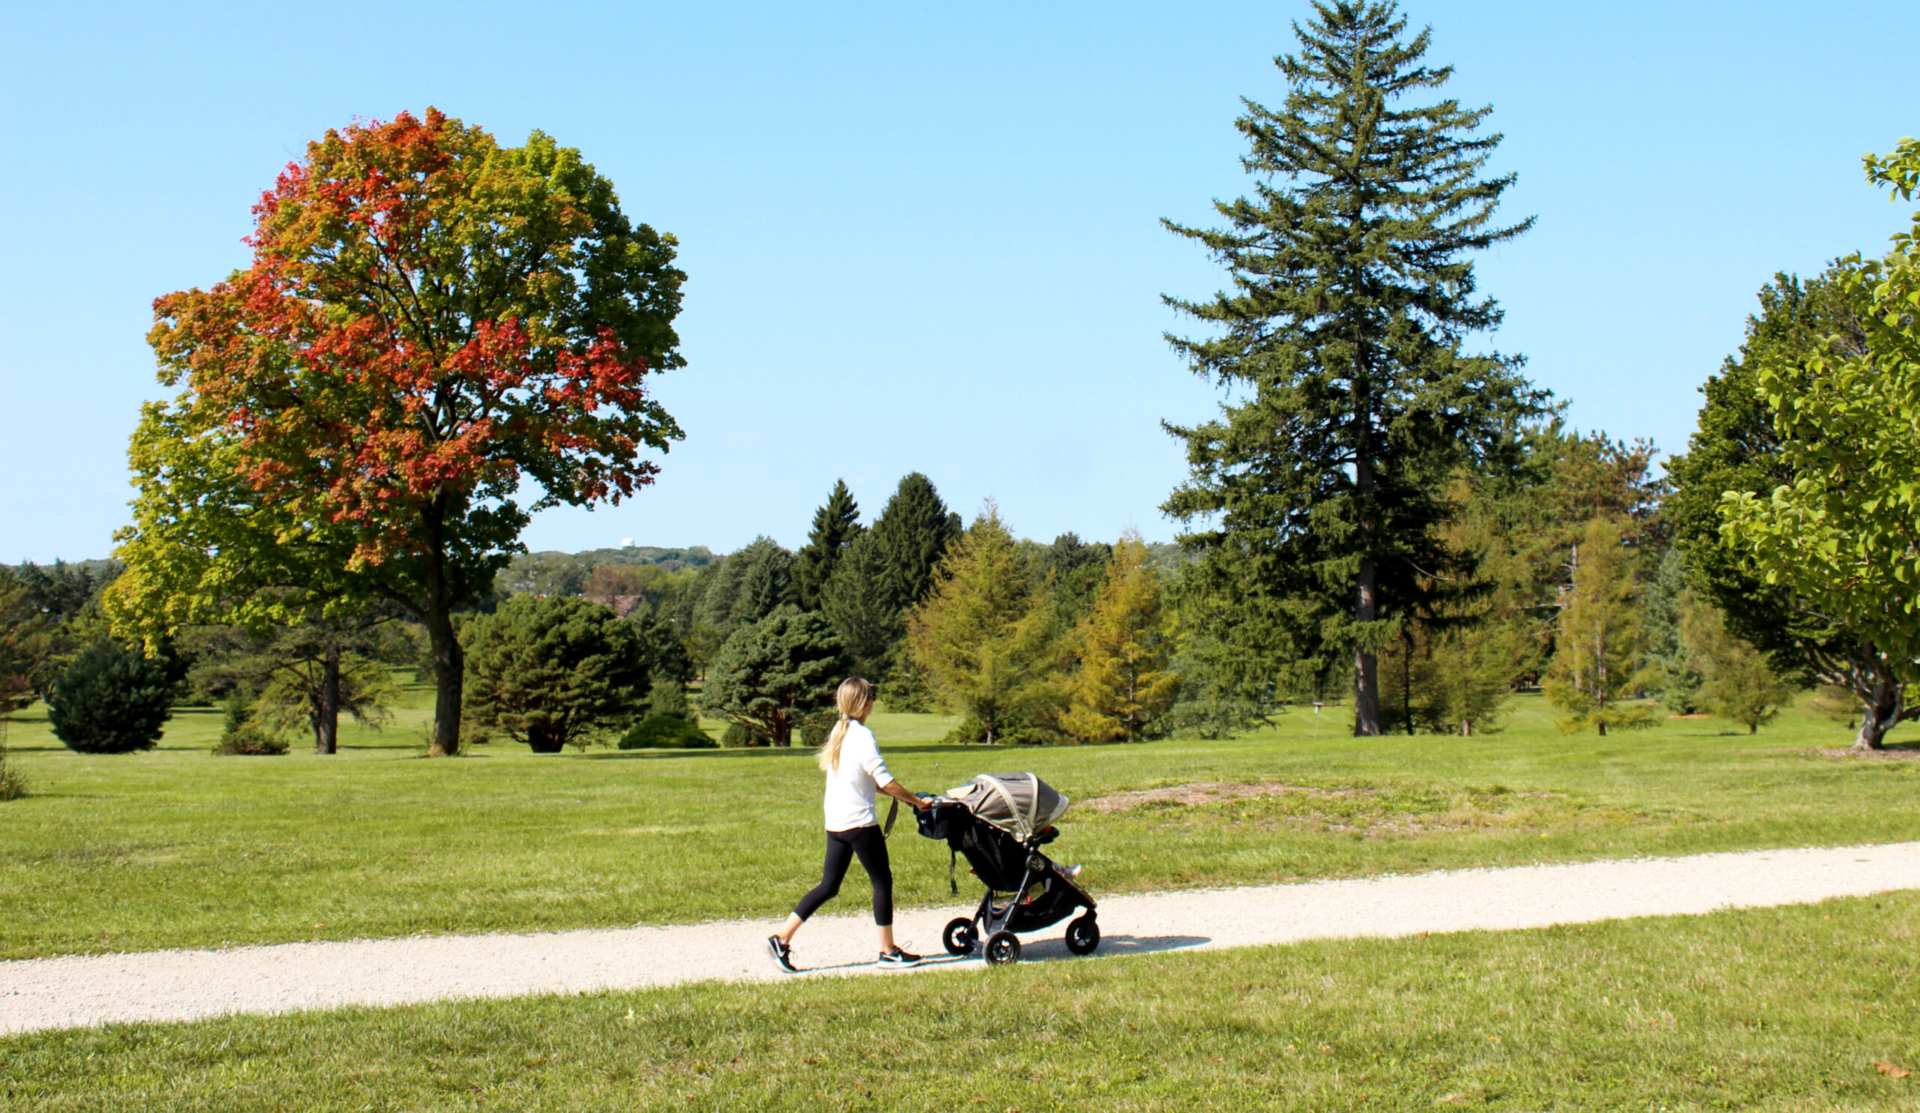 A woman walking on a paved path with a stroller in early fall.